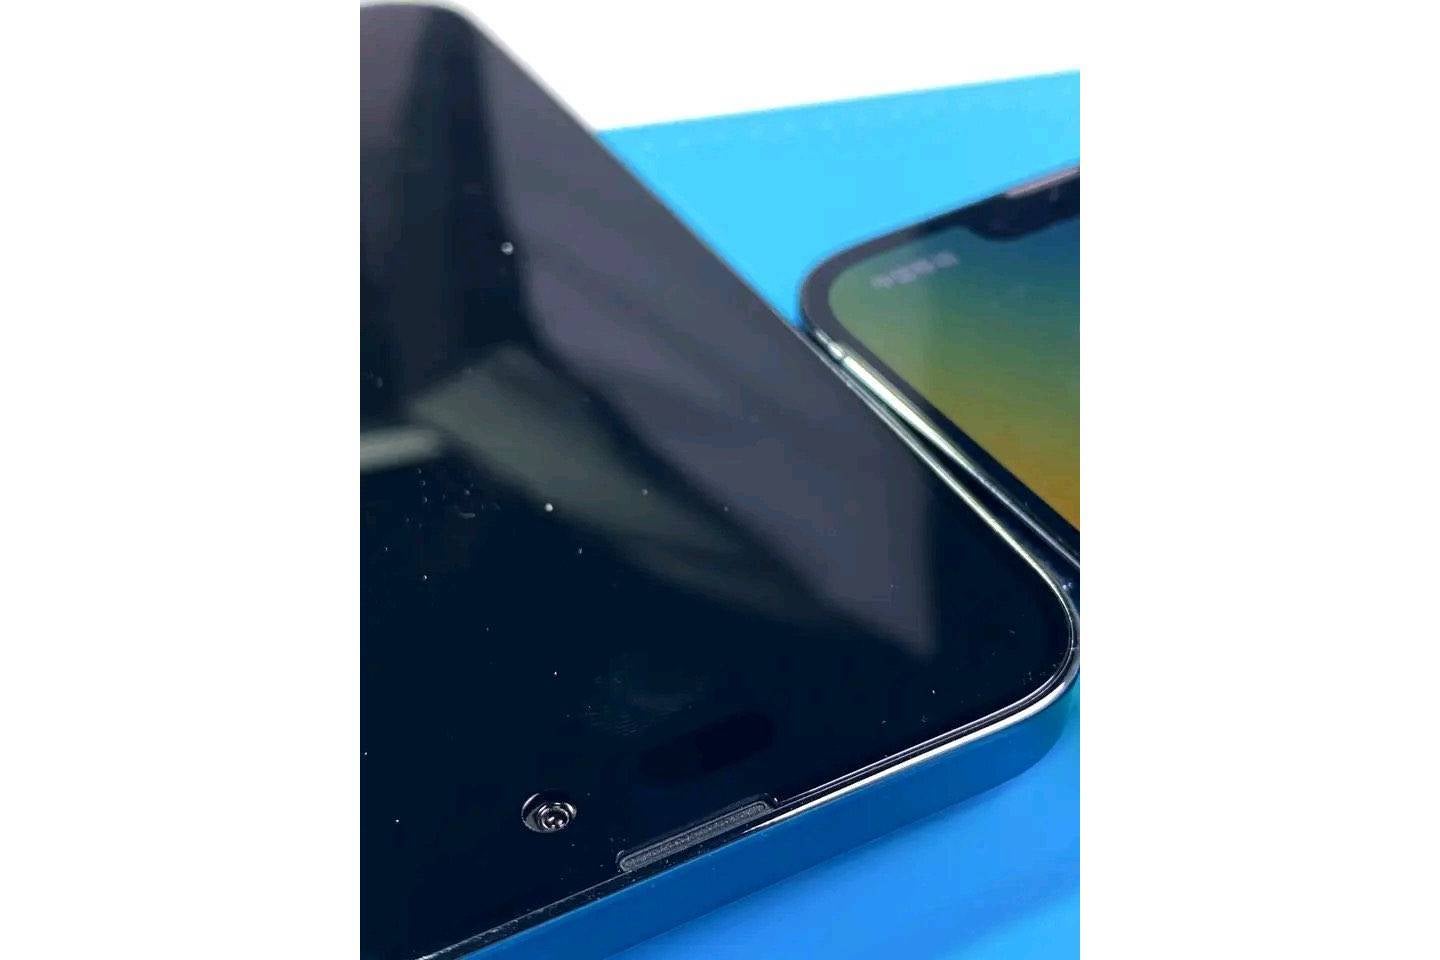 iPhone 14 Pro Max will have pill-shaped and hole cutouts instead of a notch - New video breaks down iPhone 14 Pro Max vs iPhone 13 Pro Max design differences